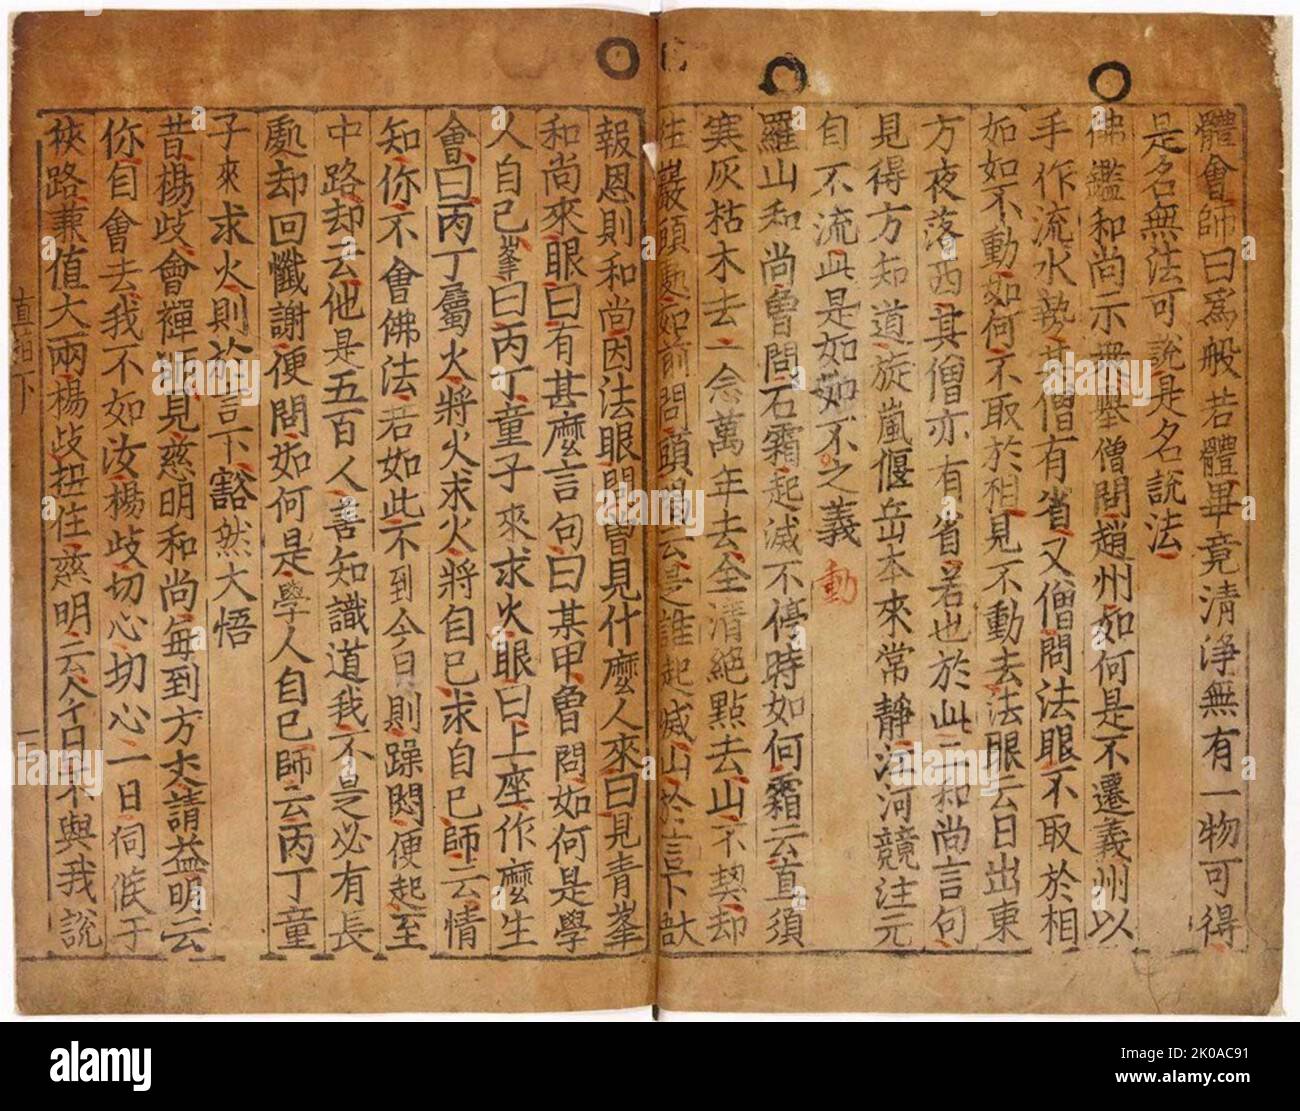 Jikji, Selected Teachings of Buddhist Sages and Seon Masters, the earliest known book printed with movable metal type. Printed in Korea, 1377 Stock Photo